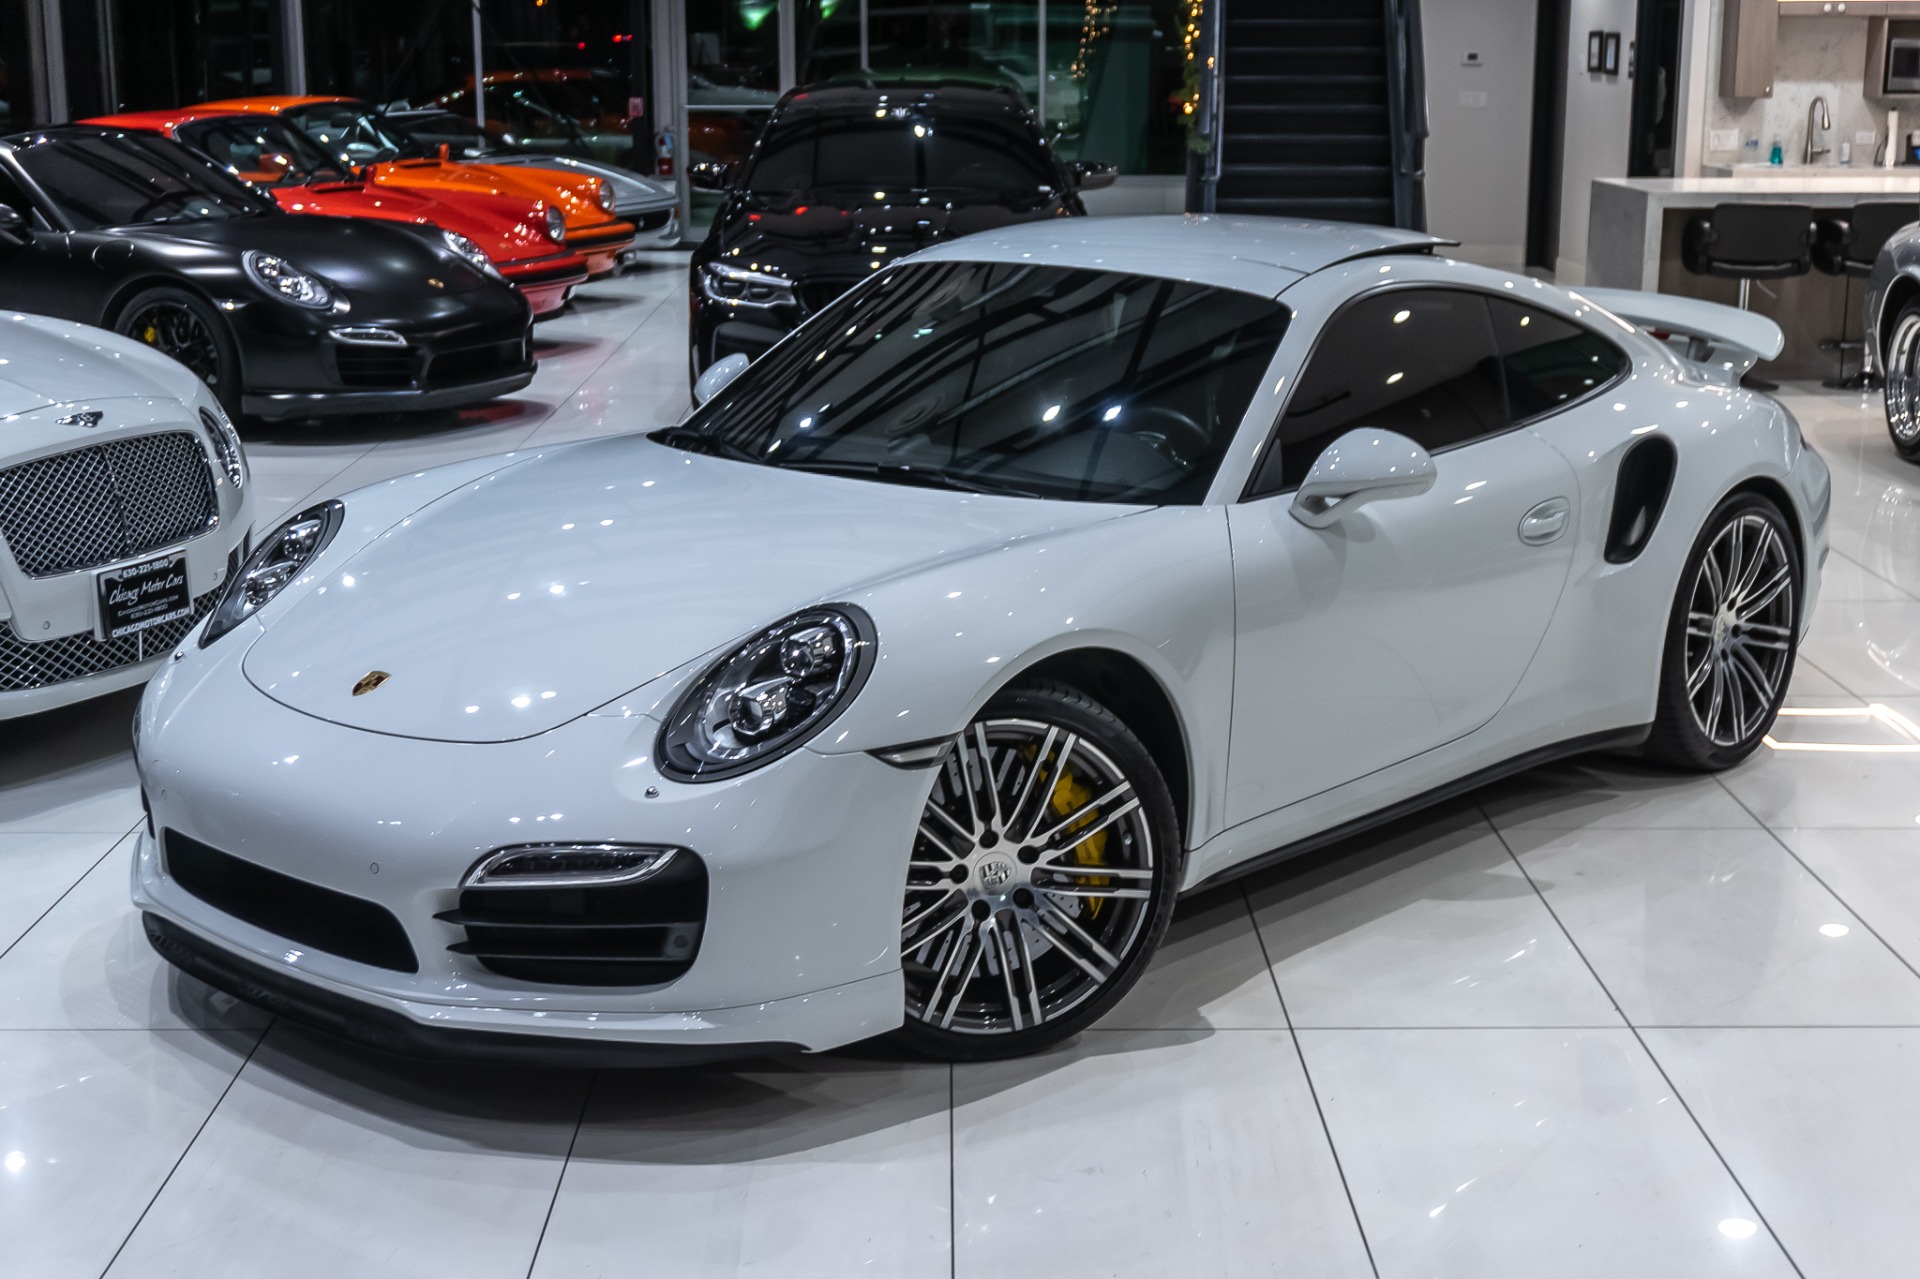 Used 2015 Porsche 911 Turbo Coupe MSRP 183,520 PDCC+PCCB